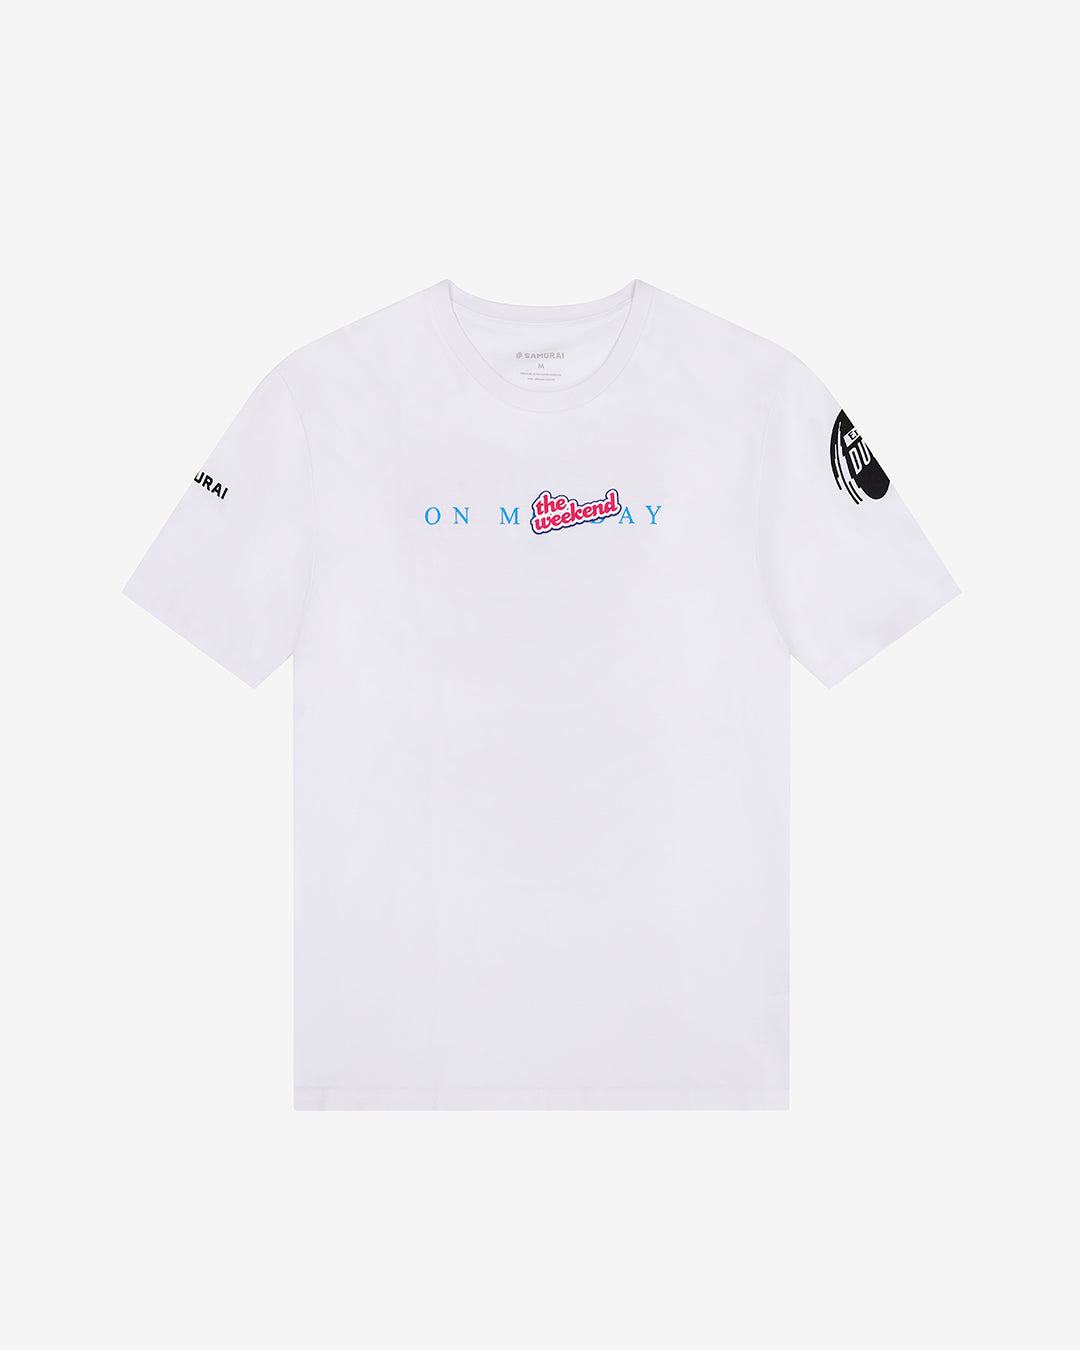 ED7:00 - On The Weekend T-Shirt - White